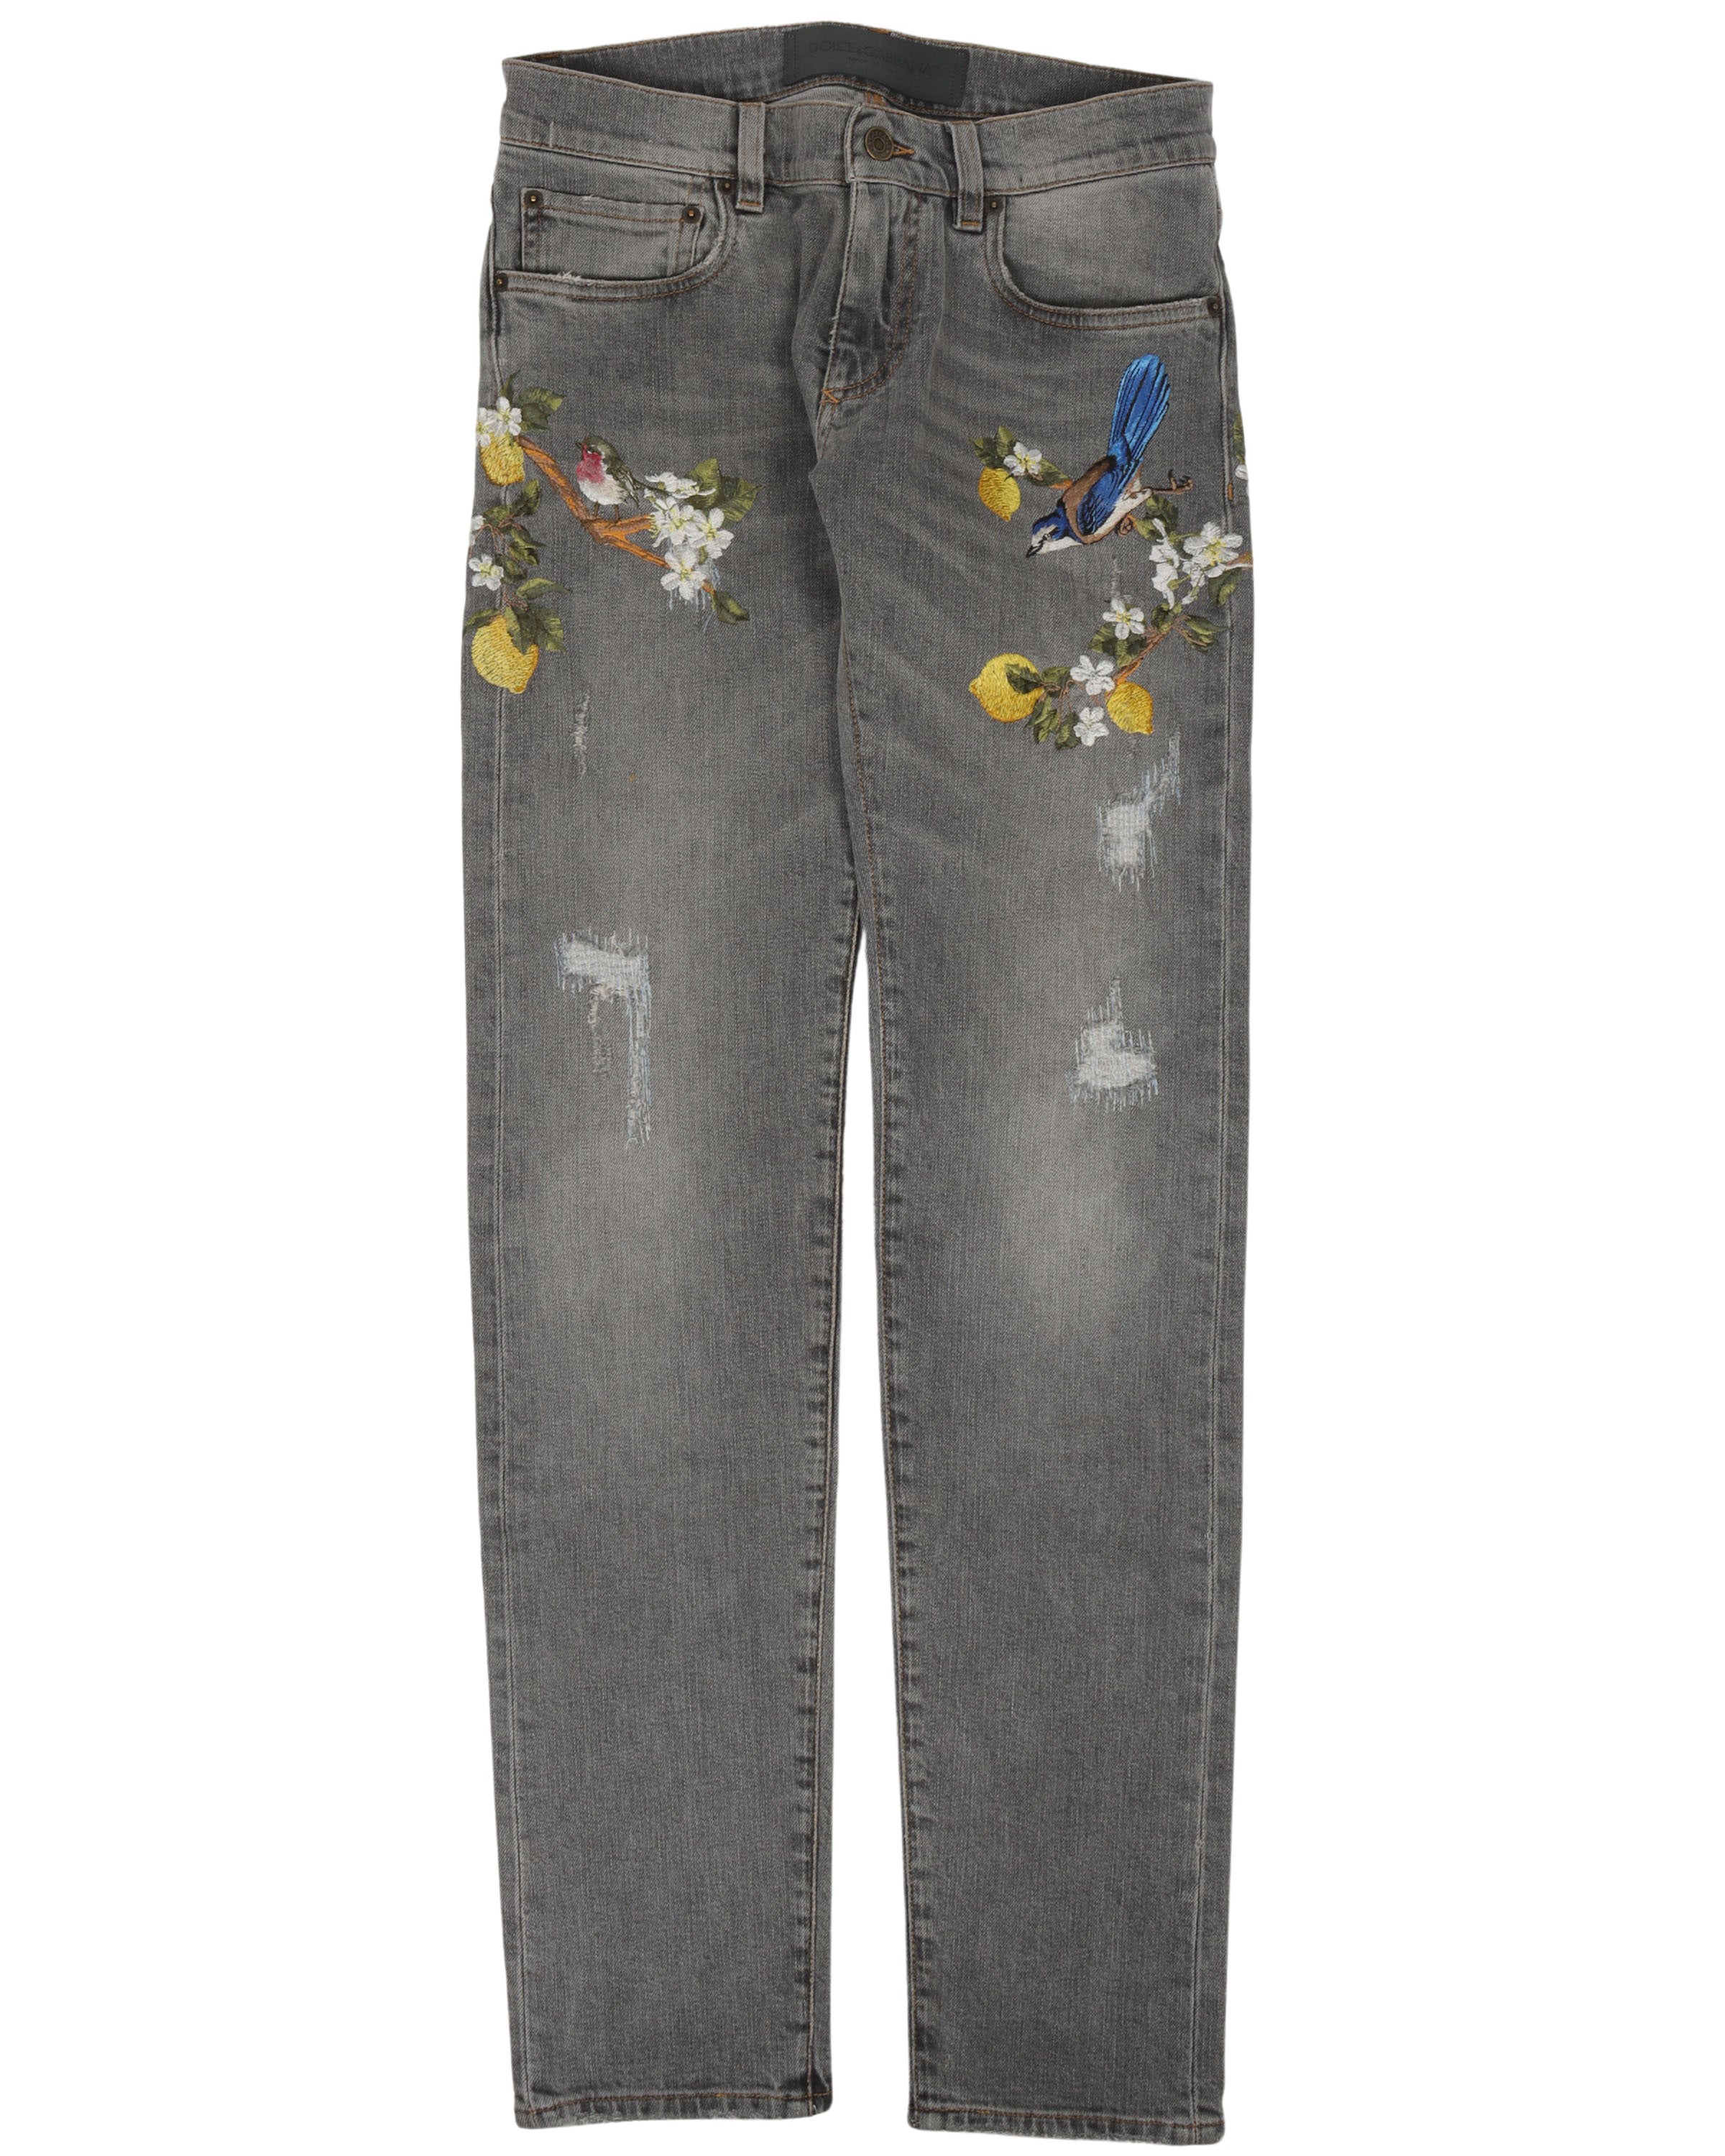 Birds and Flowers Jeans